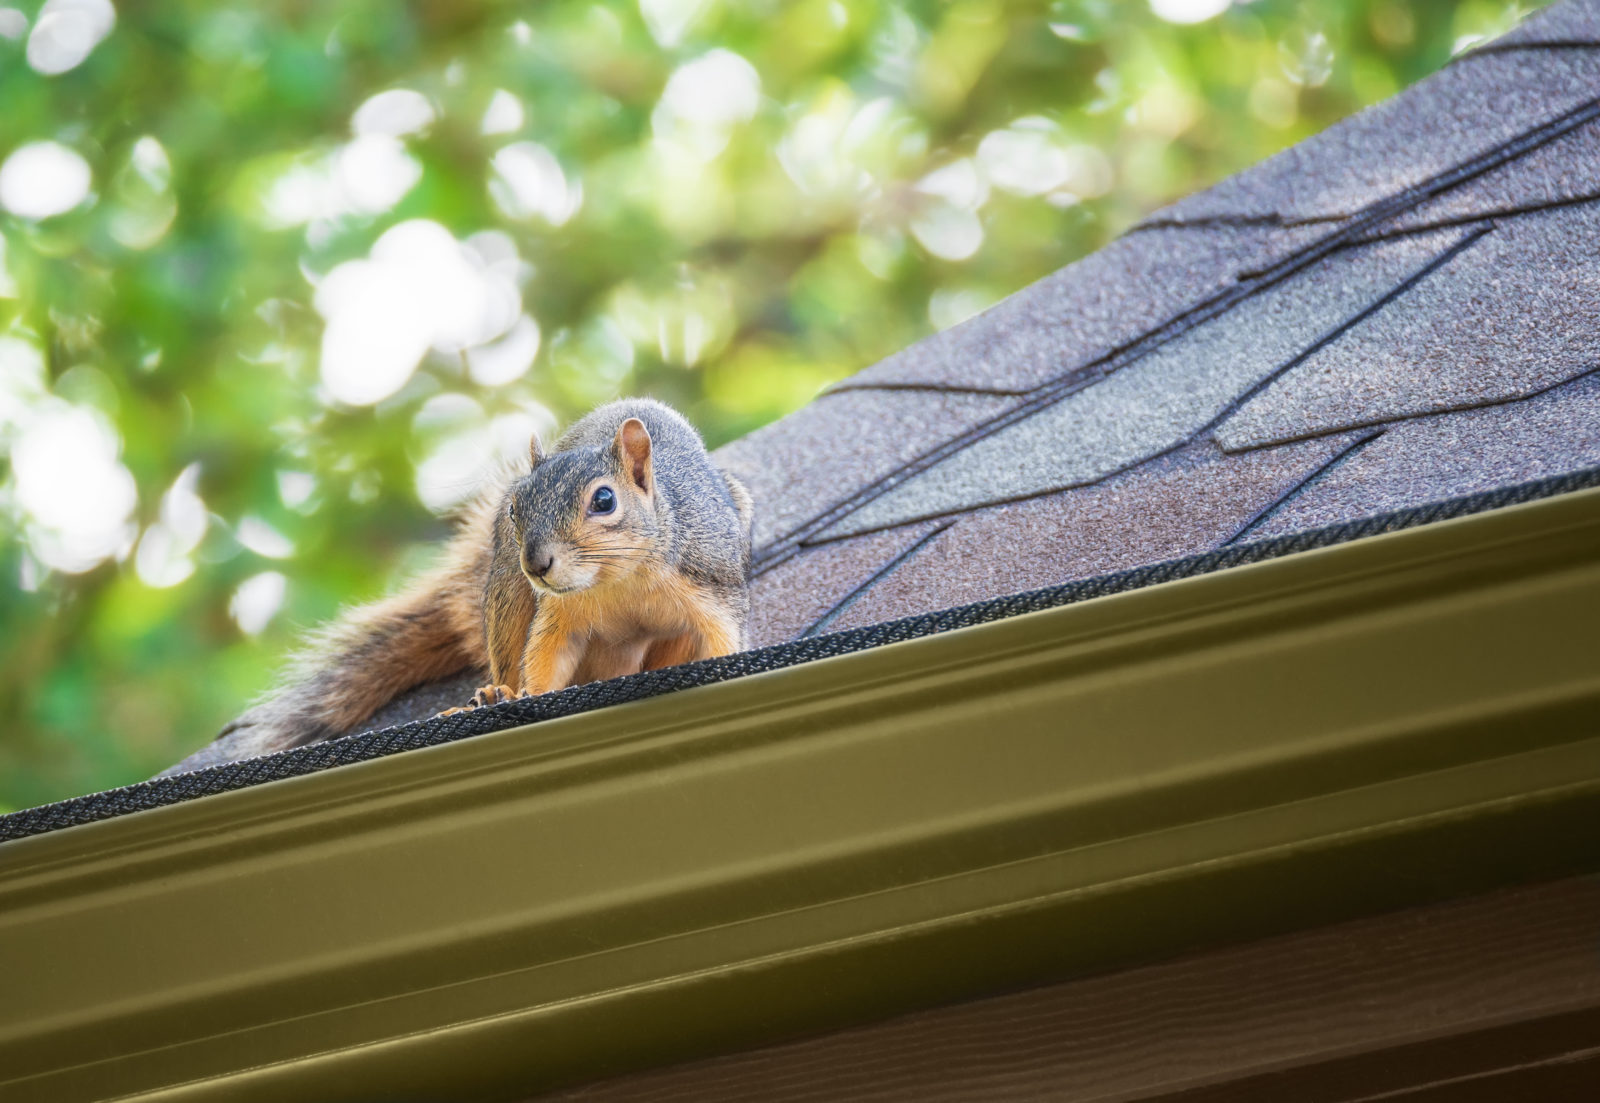 Why is Squirrel Removal Important?